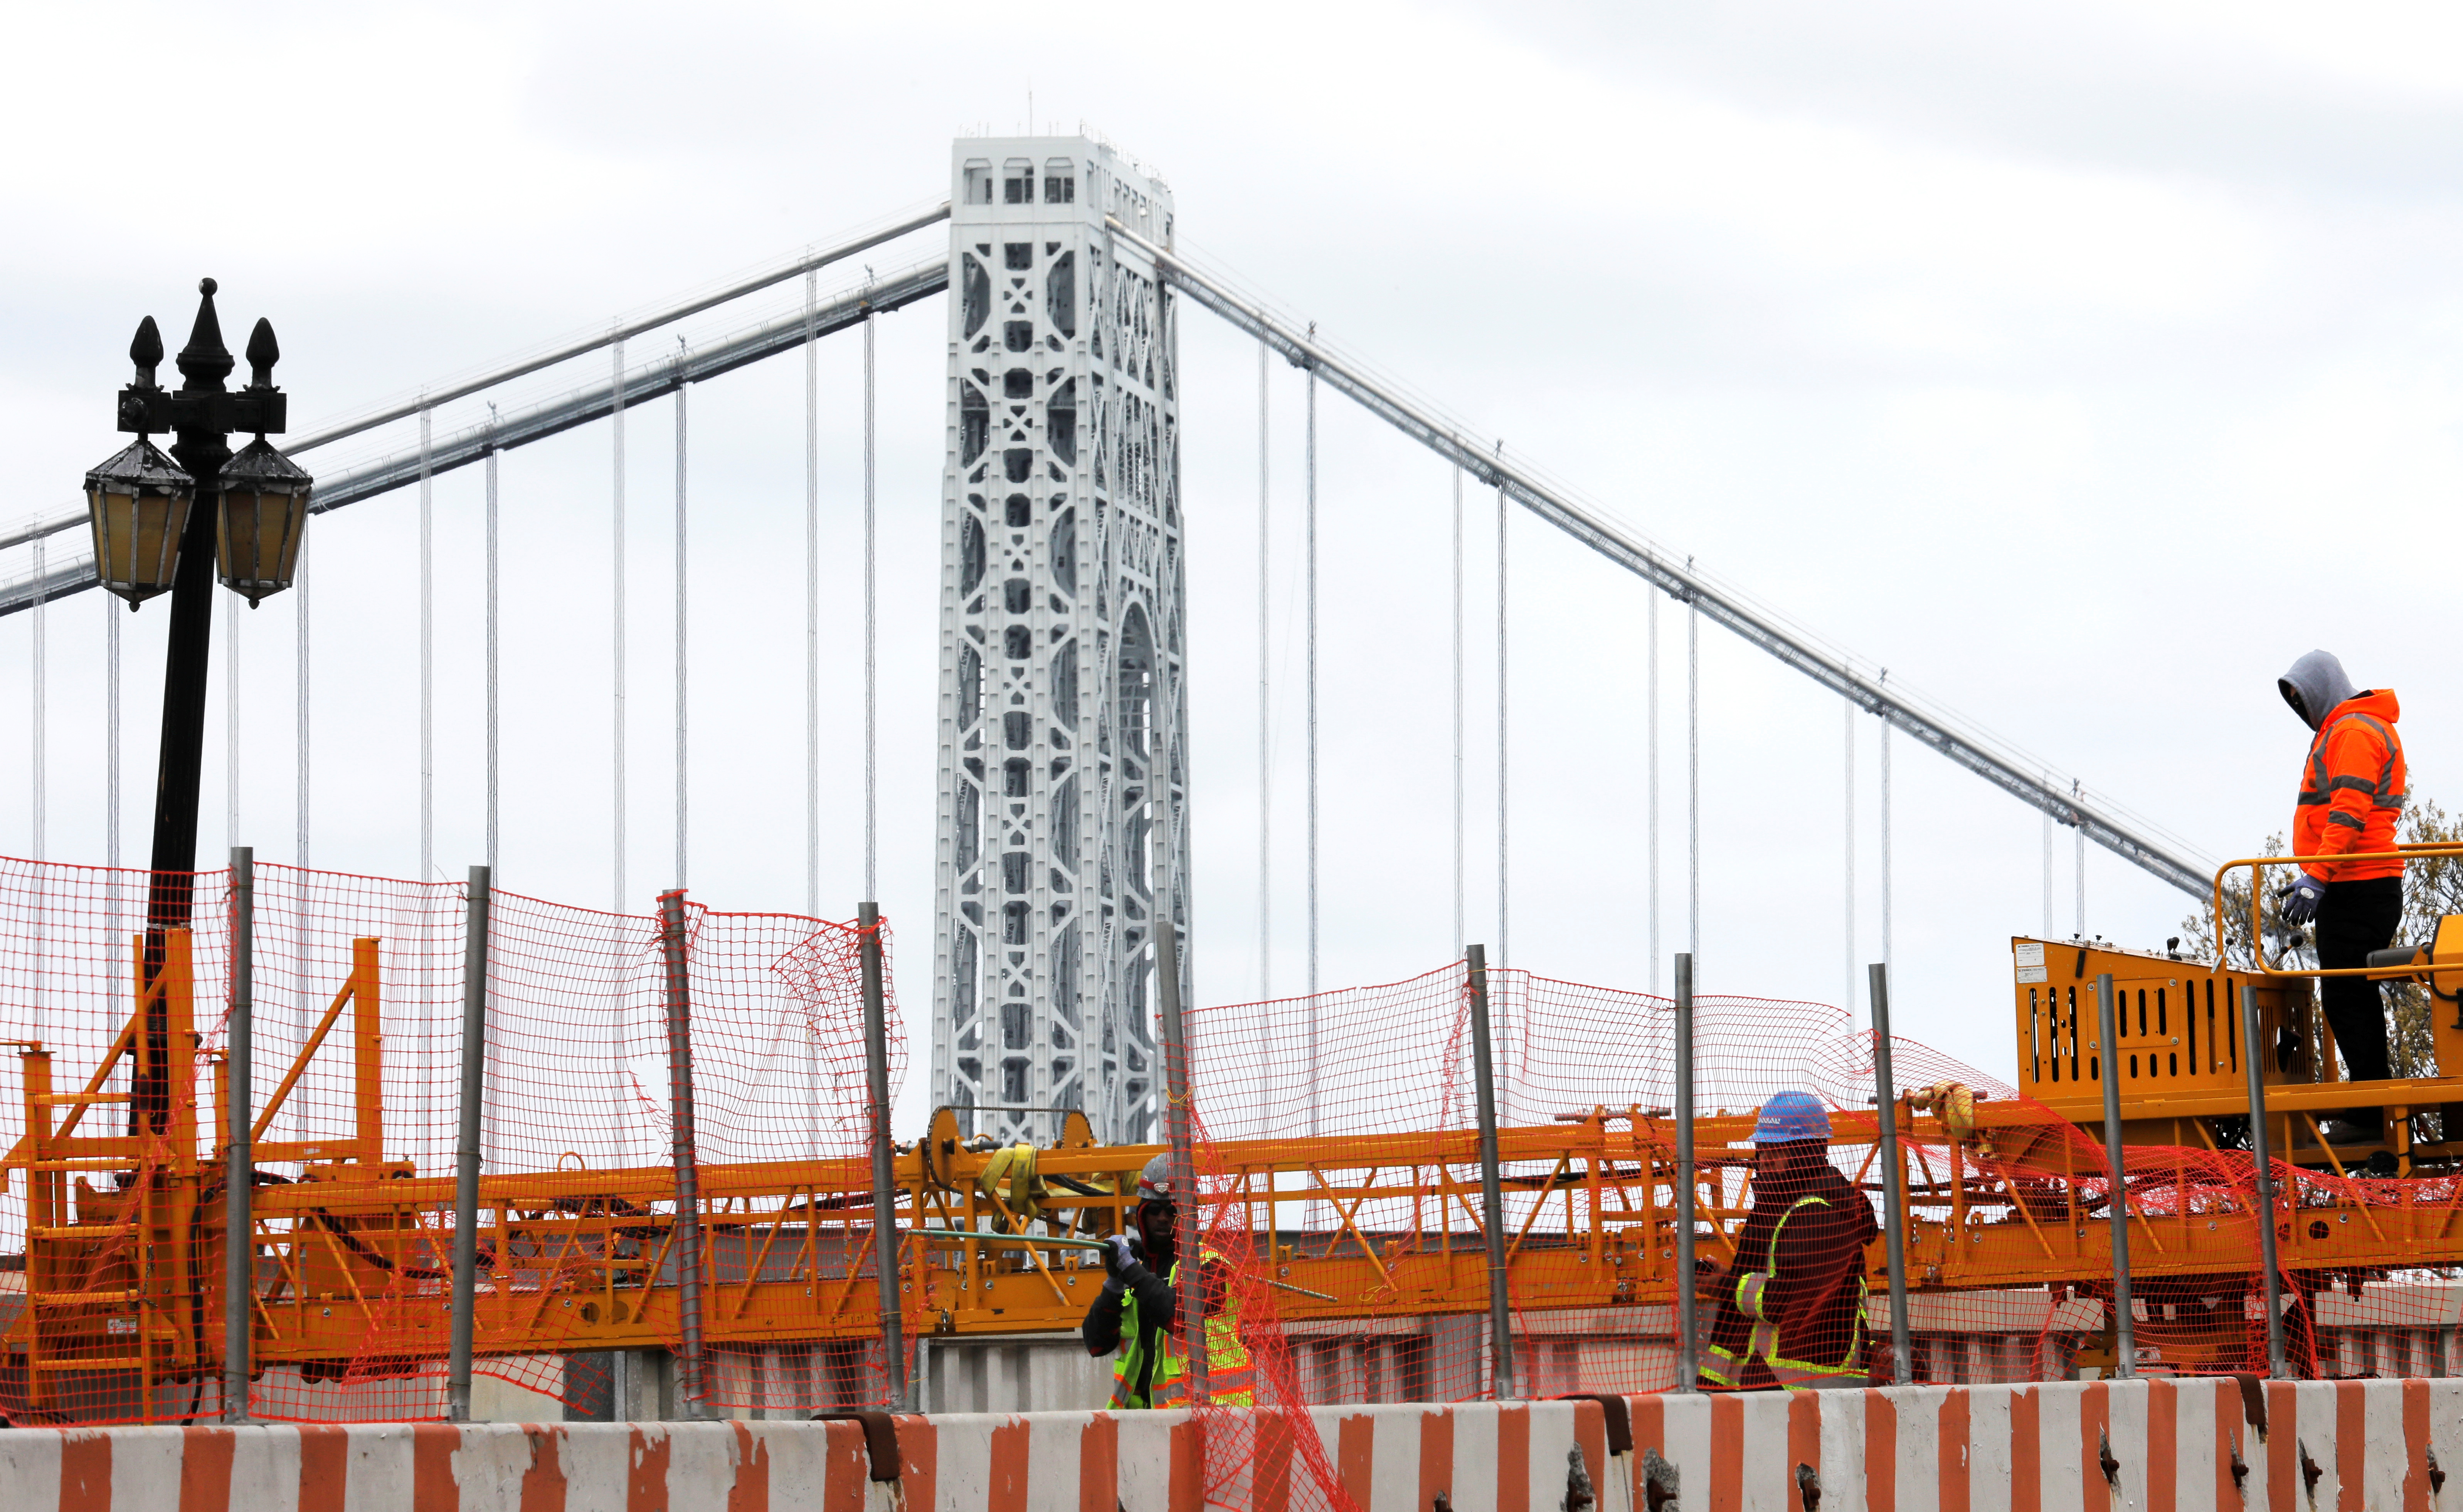 Construction workers are seen at the site of a large public infrastructure reconstruction project in New York